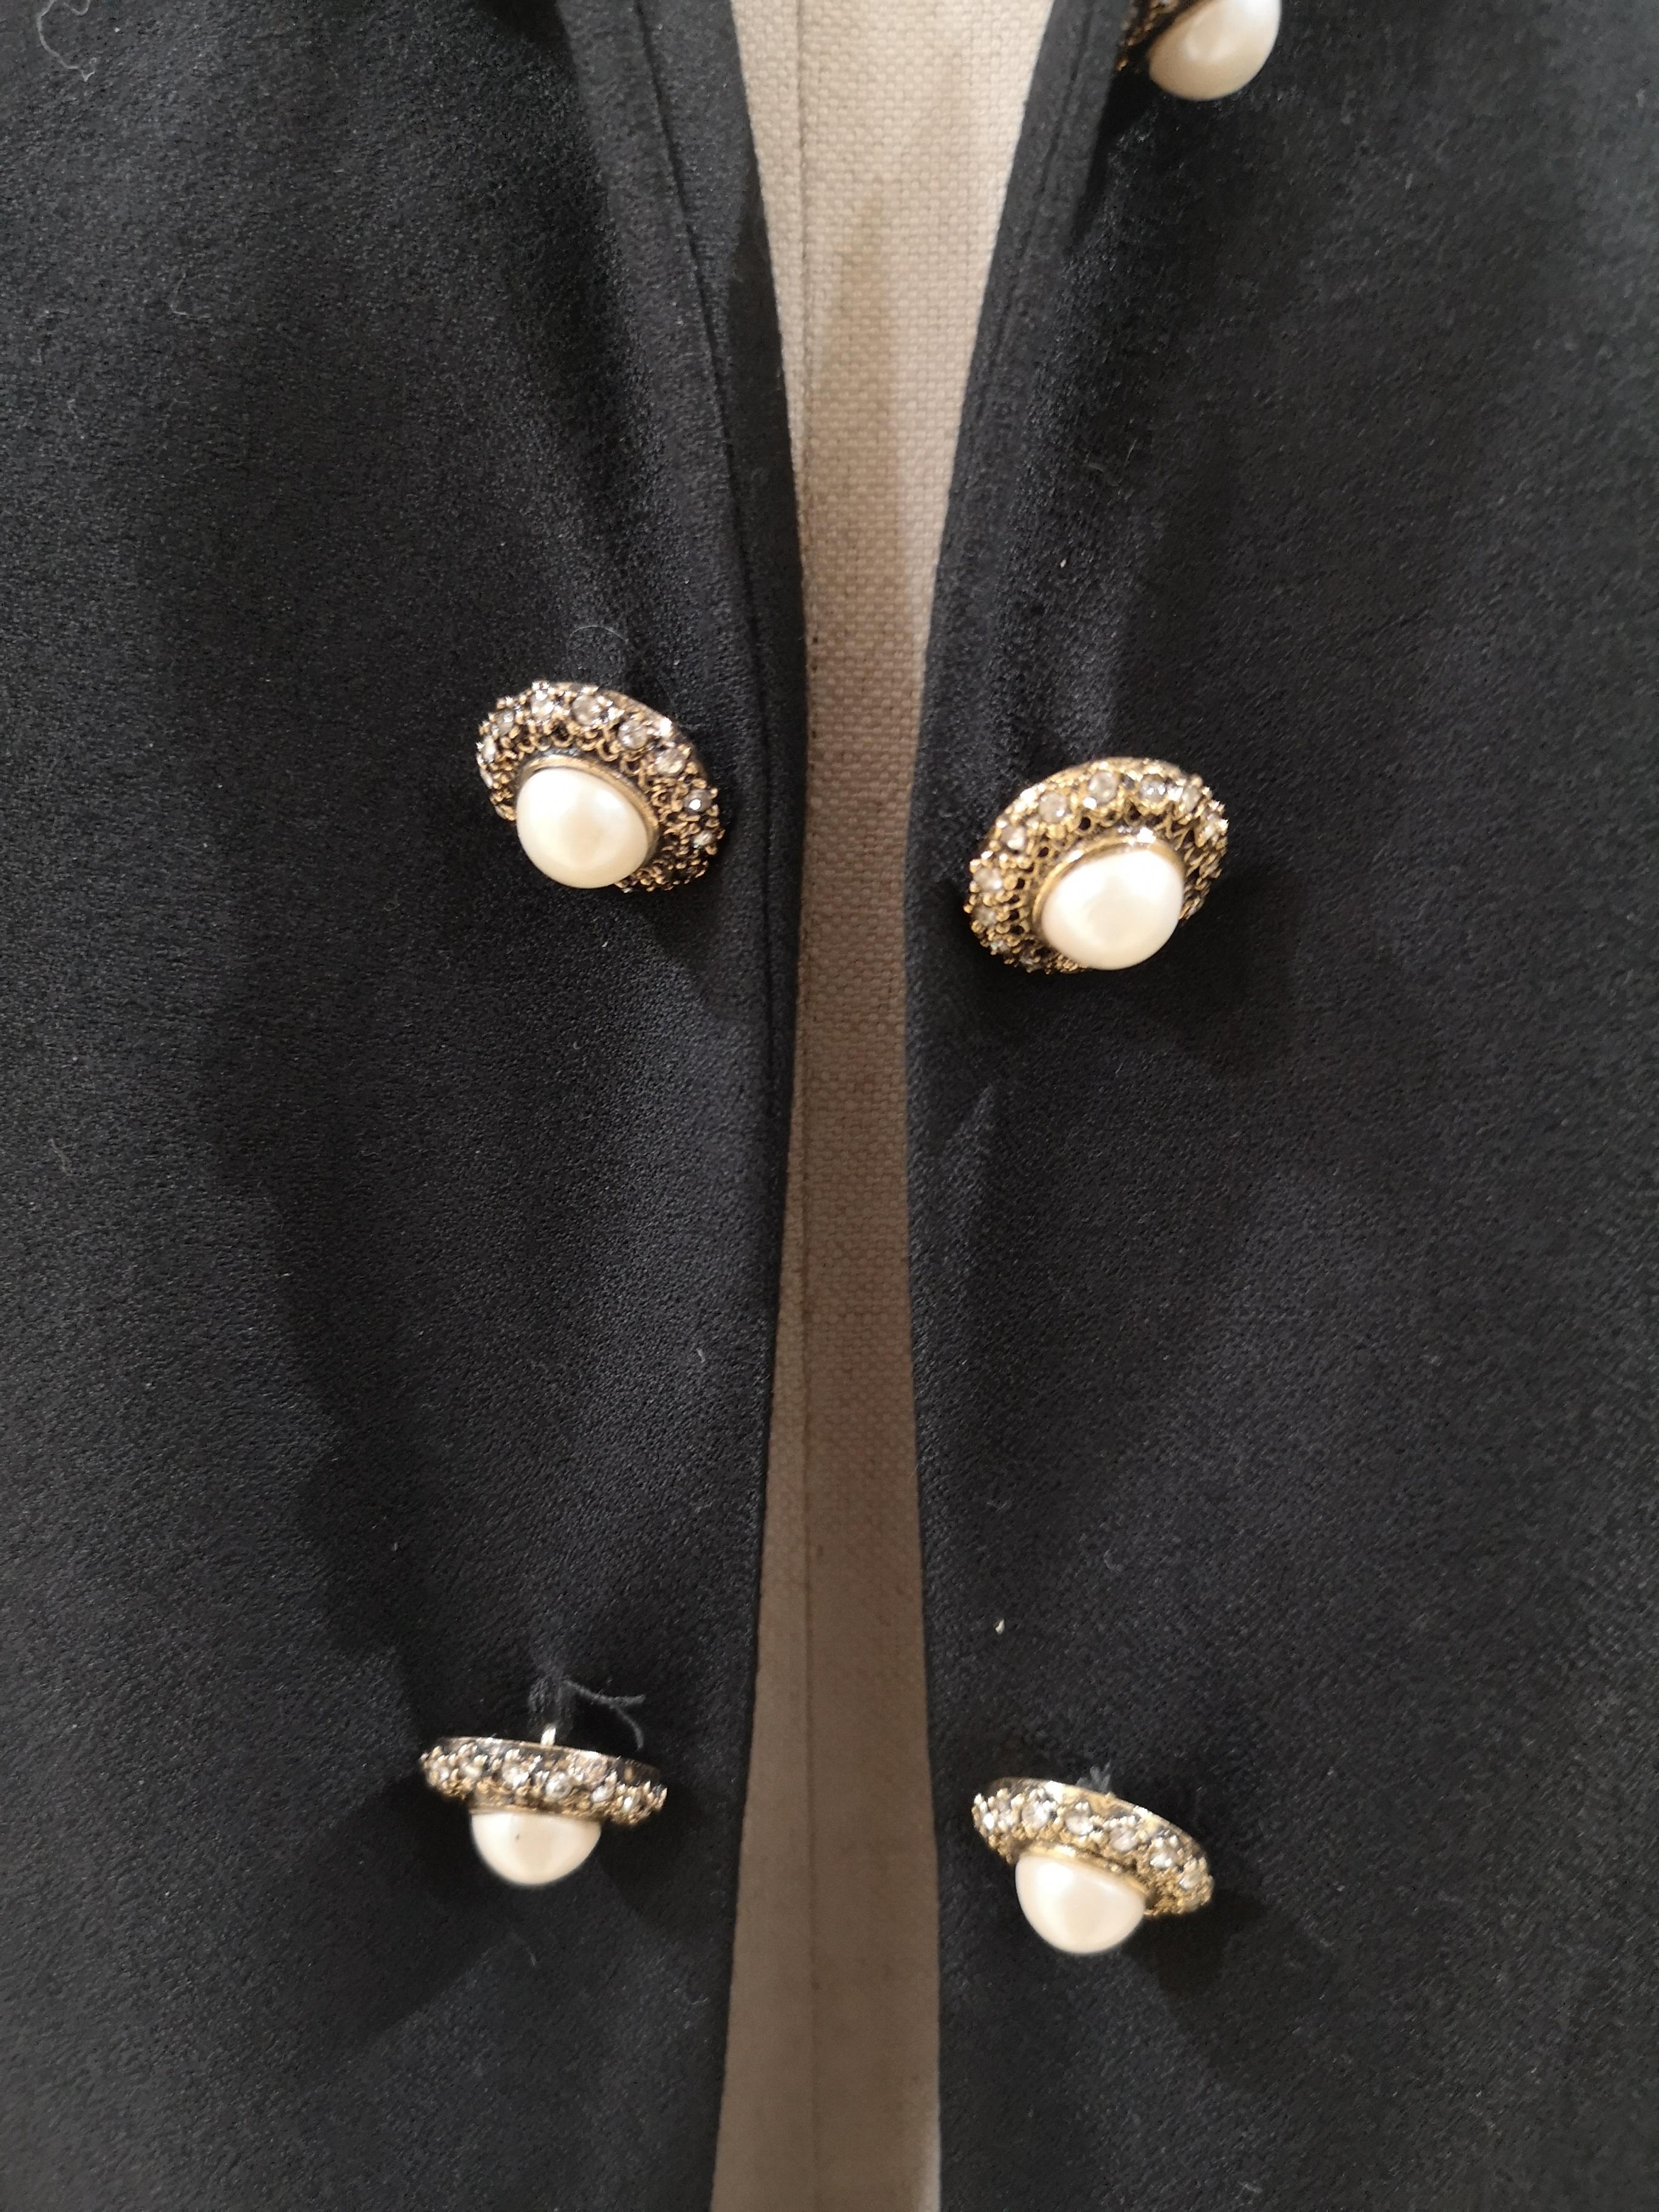 Moschino Couture Peace and Pearls black jacket
Black jacket embellished with swarovski stones around the buttons
on the back peace and pearls, peace symbol made of white pearls
totally made in italy in size 48
total lenght 45 cm
shoulder to hem 60 cm